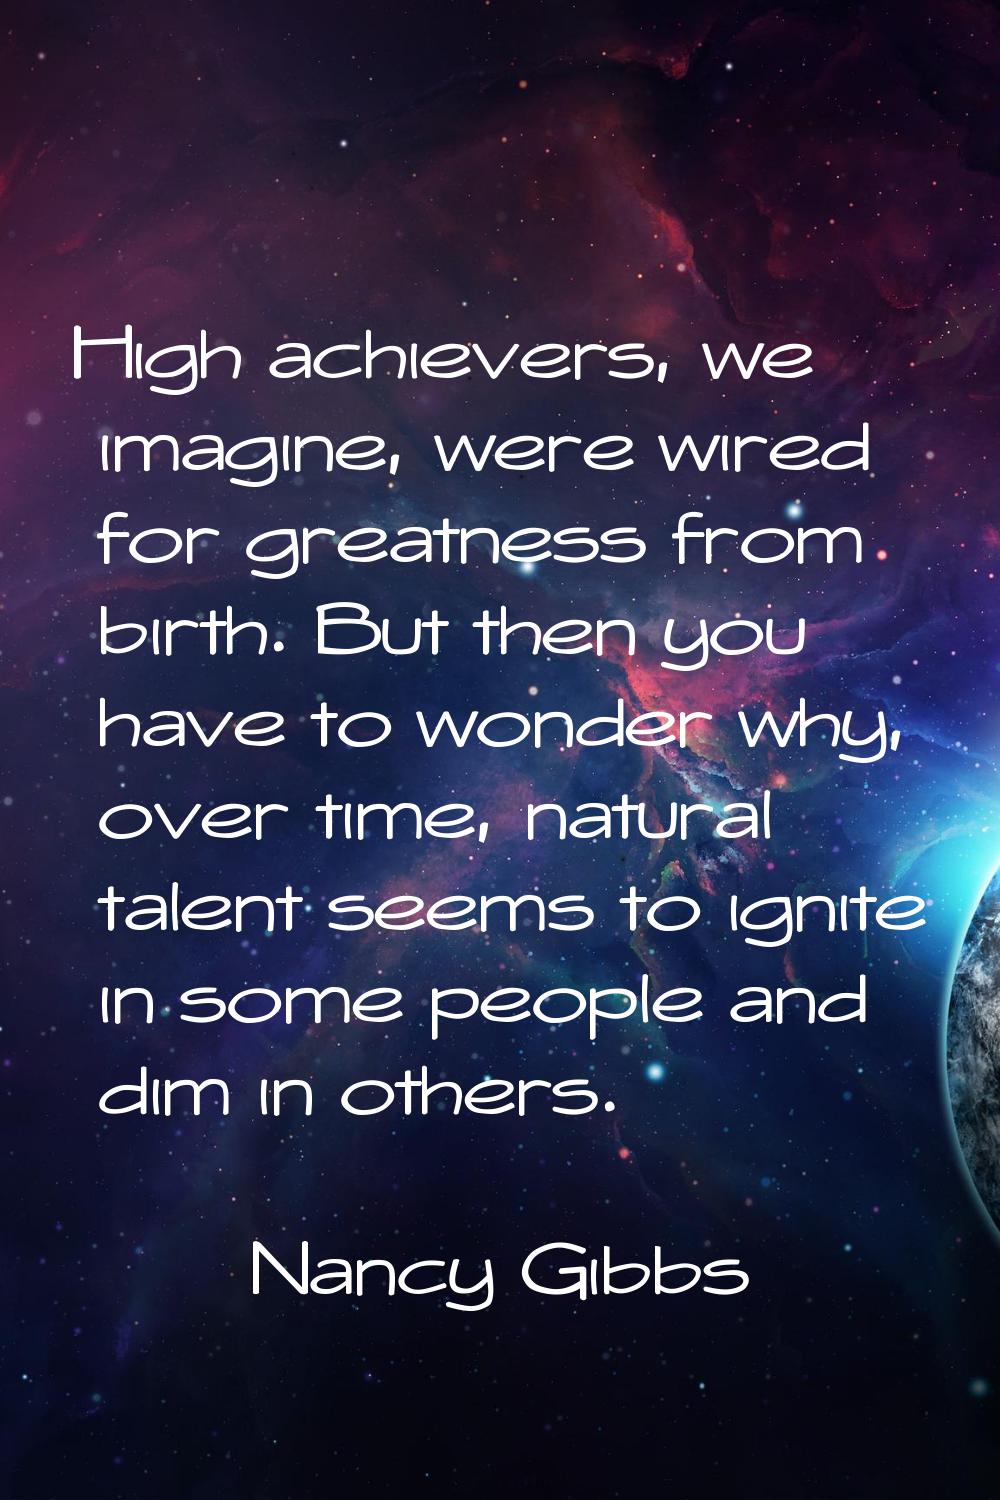 High achievers, we imagine, were wired for greatness from birth. But then you have to wonder why, o